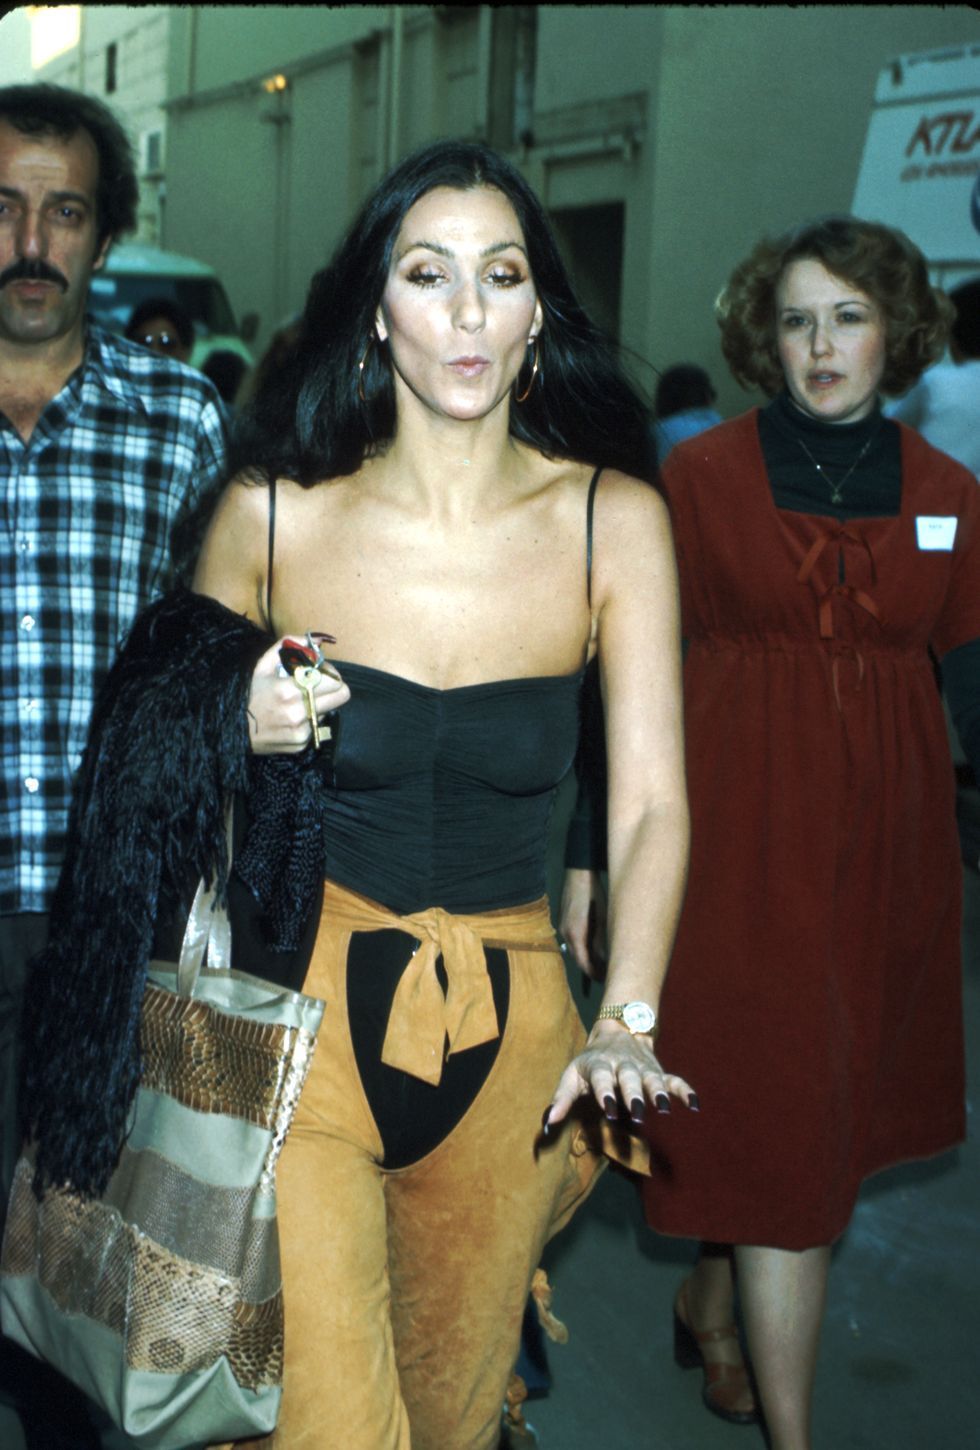 Cher's Best Outfits and Fashion Moments Over The Years - Cher Photos and Style Evolution - Cher's Best Outfits and Fashion Moments Over The Years - Cher Photos and Style Evolution -   13 cher fashion style Icons ideas